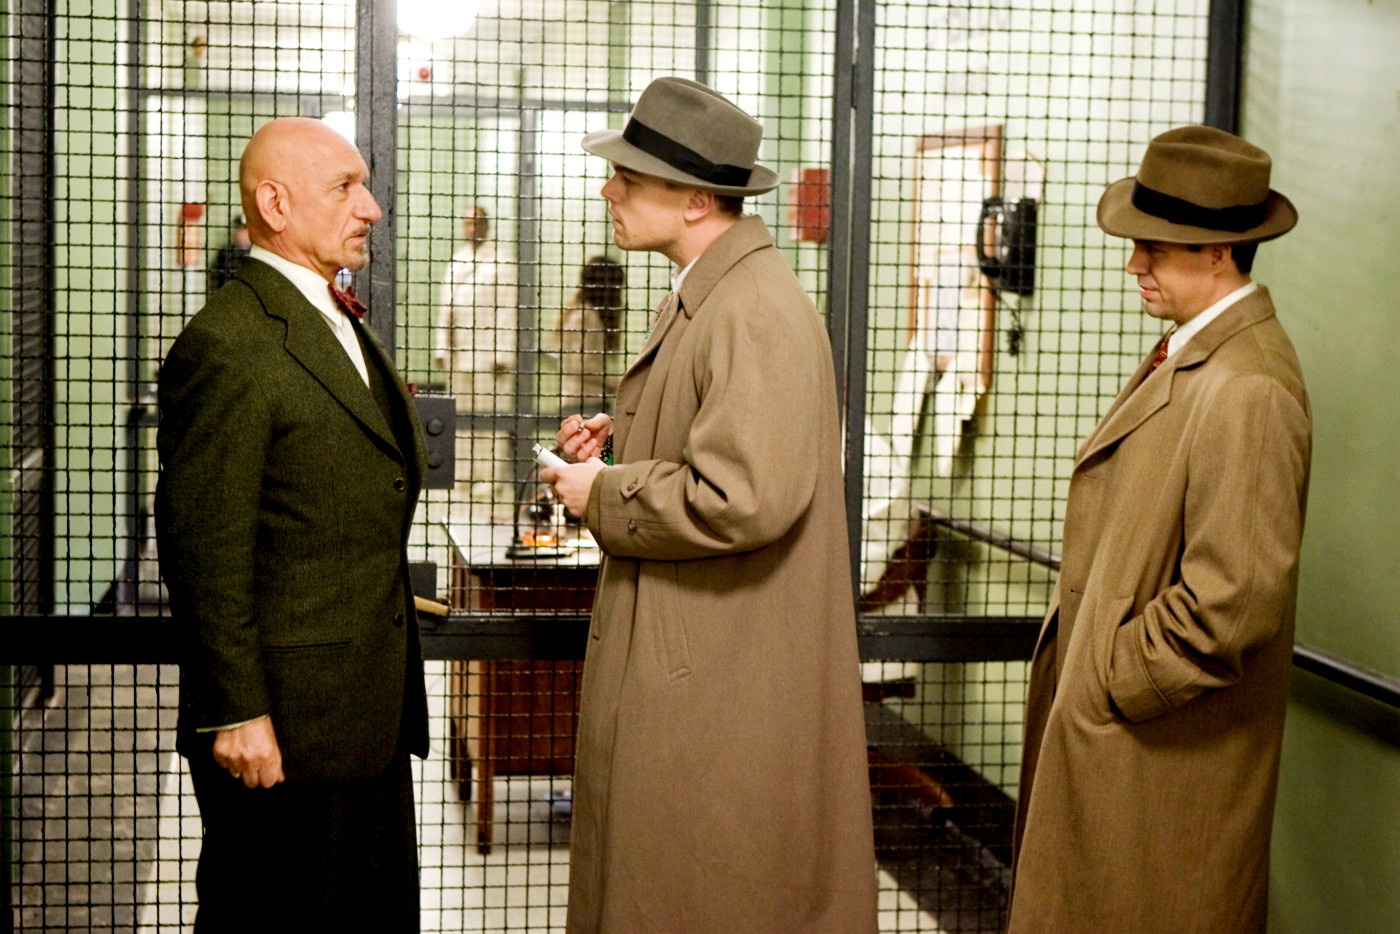 Ben Kingsley, Leonardo DiCaprio and Mark Ruffalo in Paramount Pictures' Shutter Island (2010)